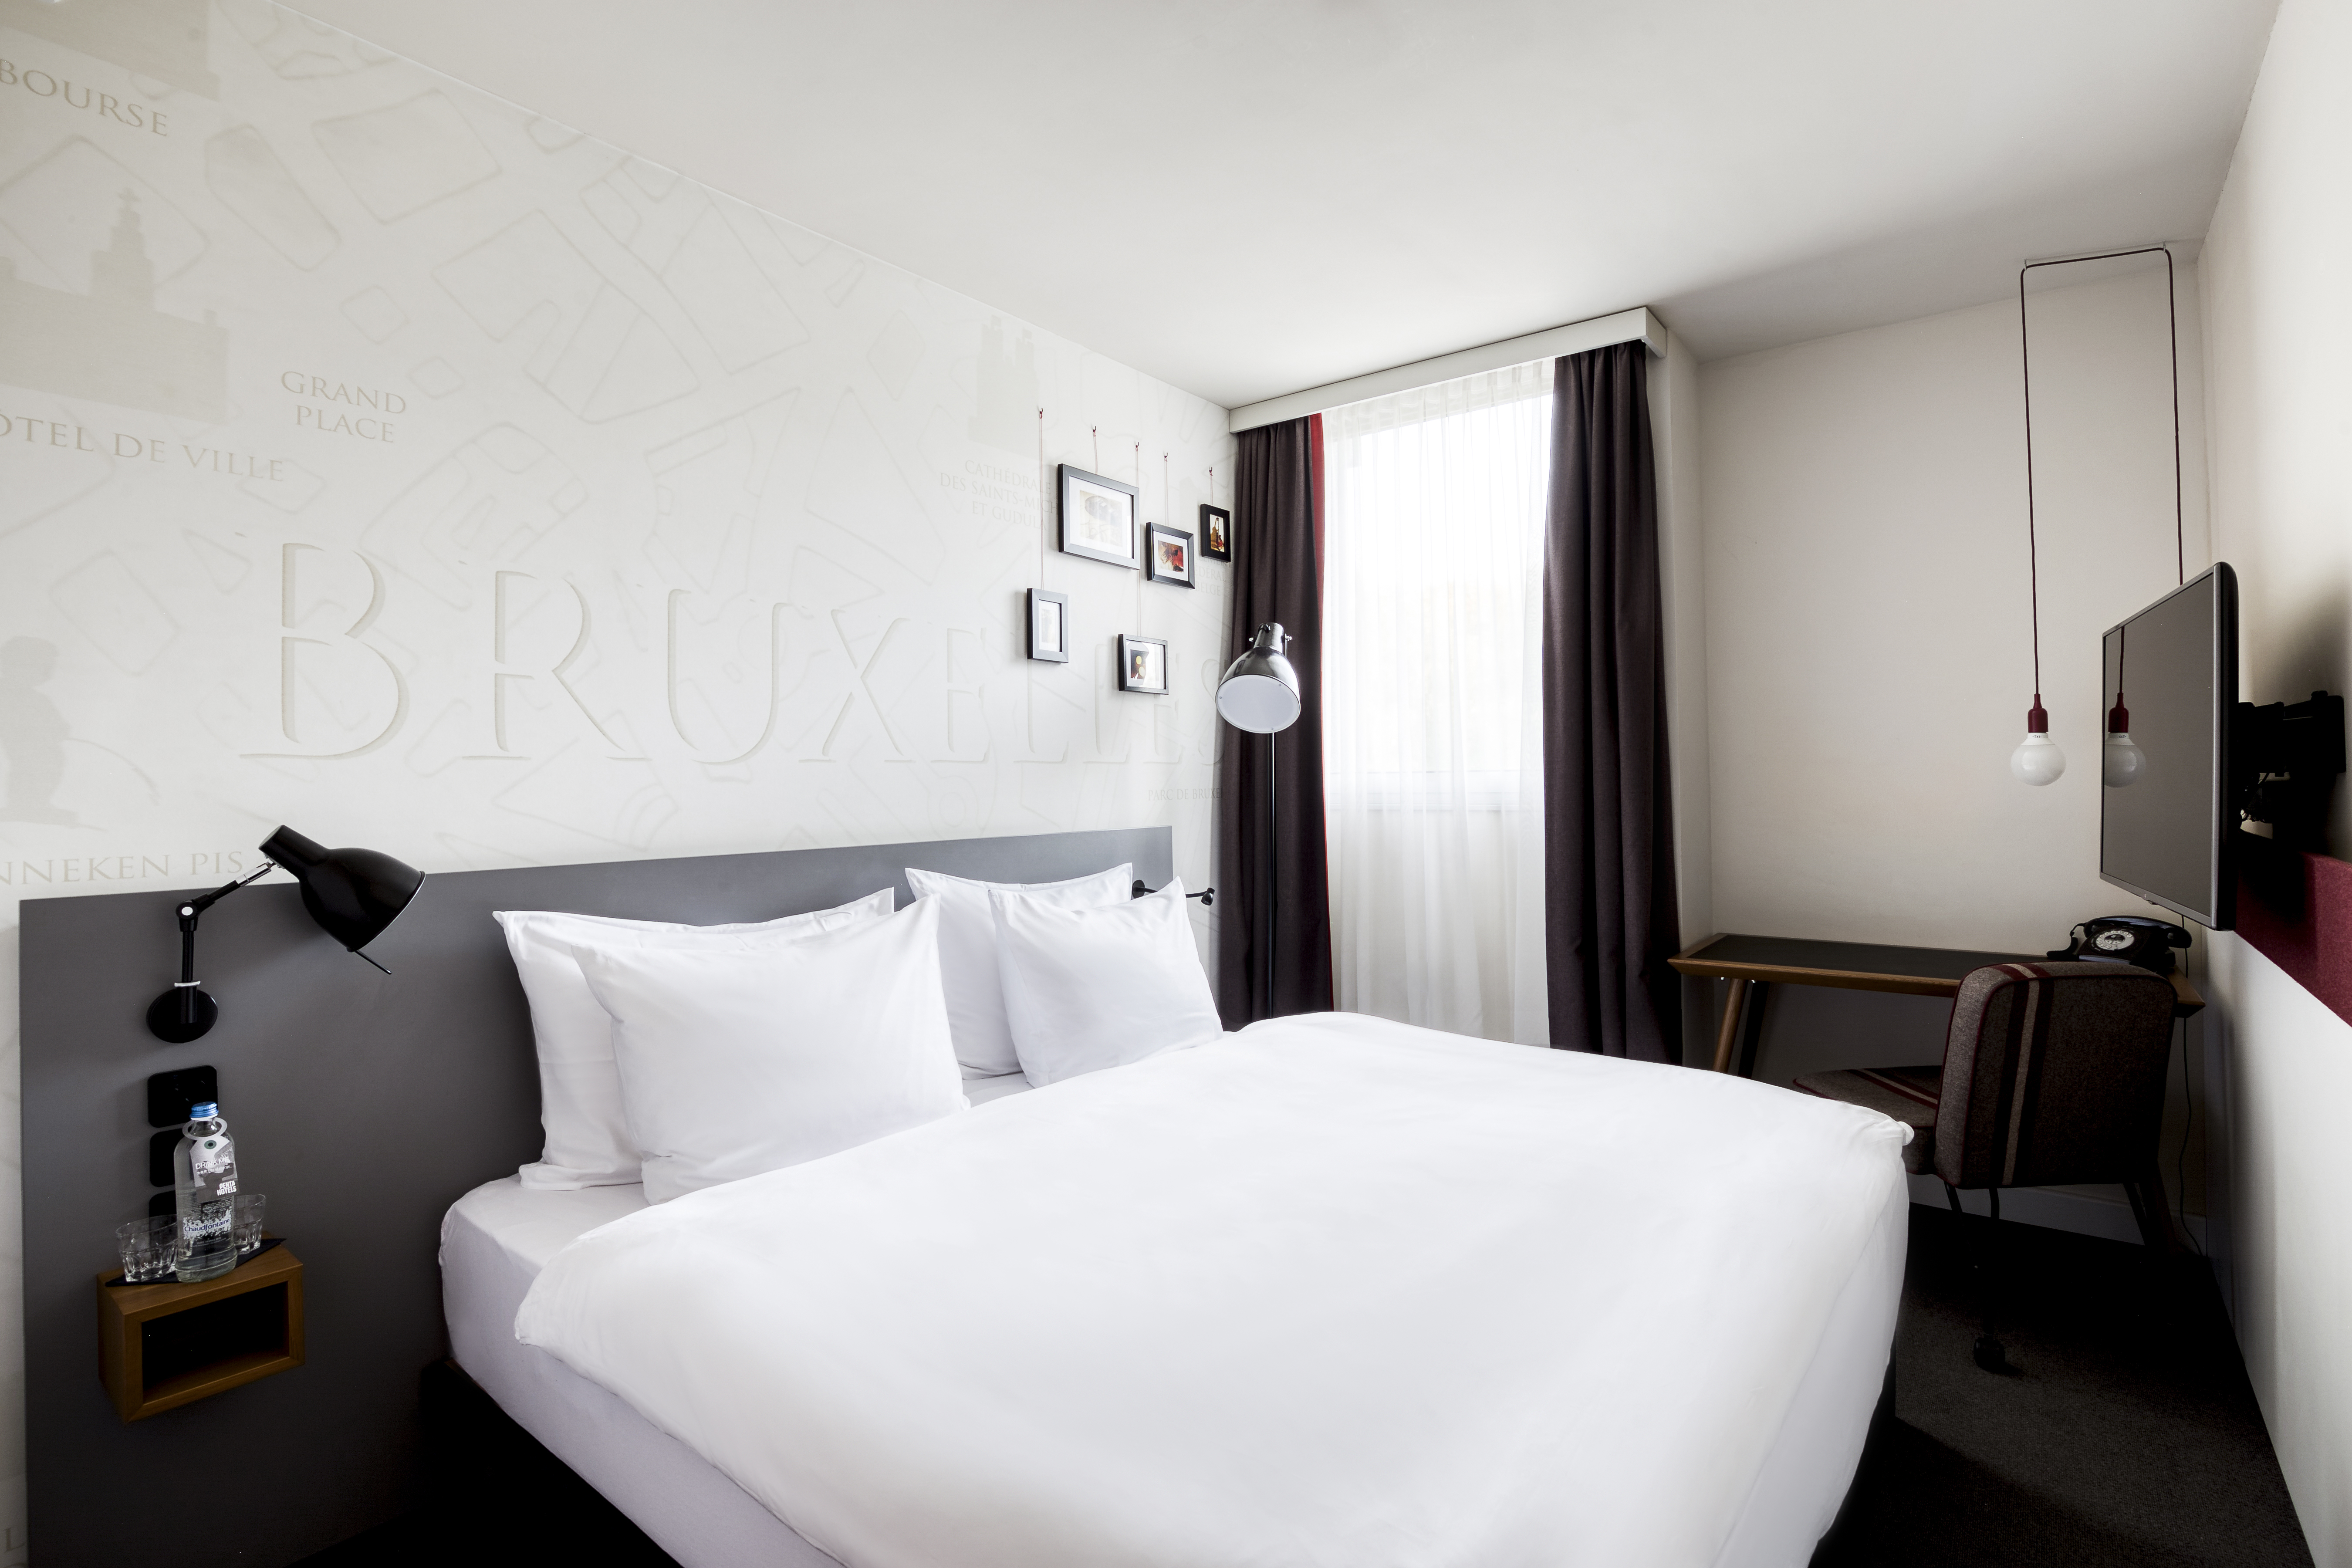 Pentahotel Brussels Airport <br/>66.30 ew <br/> <a href='http://vakantieoplossing.nl/outpage/?id=6595ed1f5daa95e1e19ab8d6fbf578e3' target='_blank'>View Details</a>